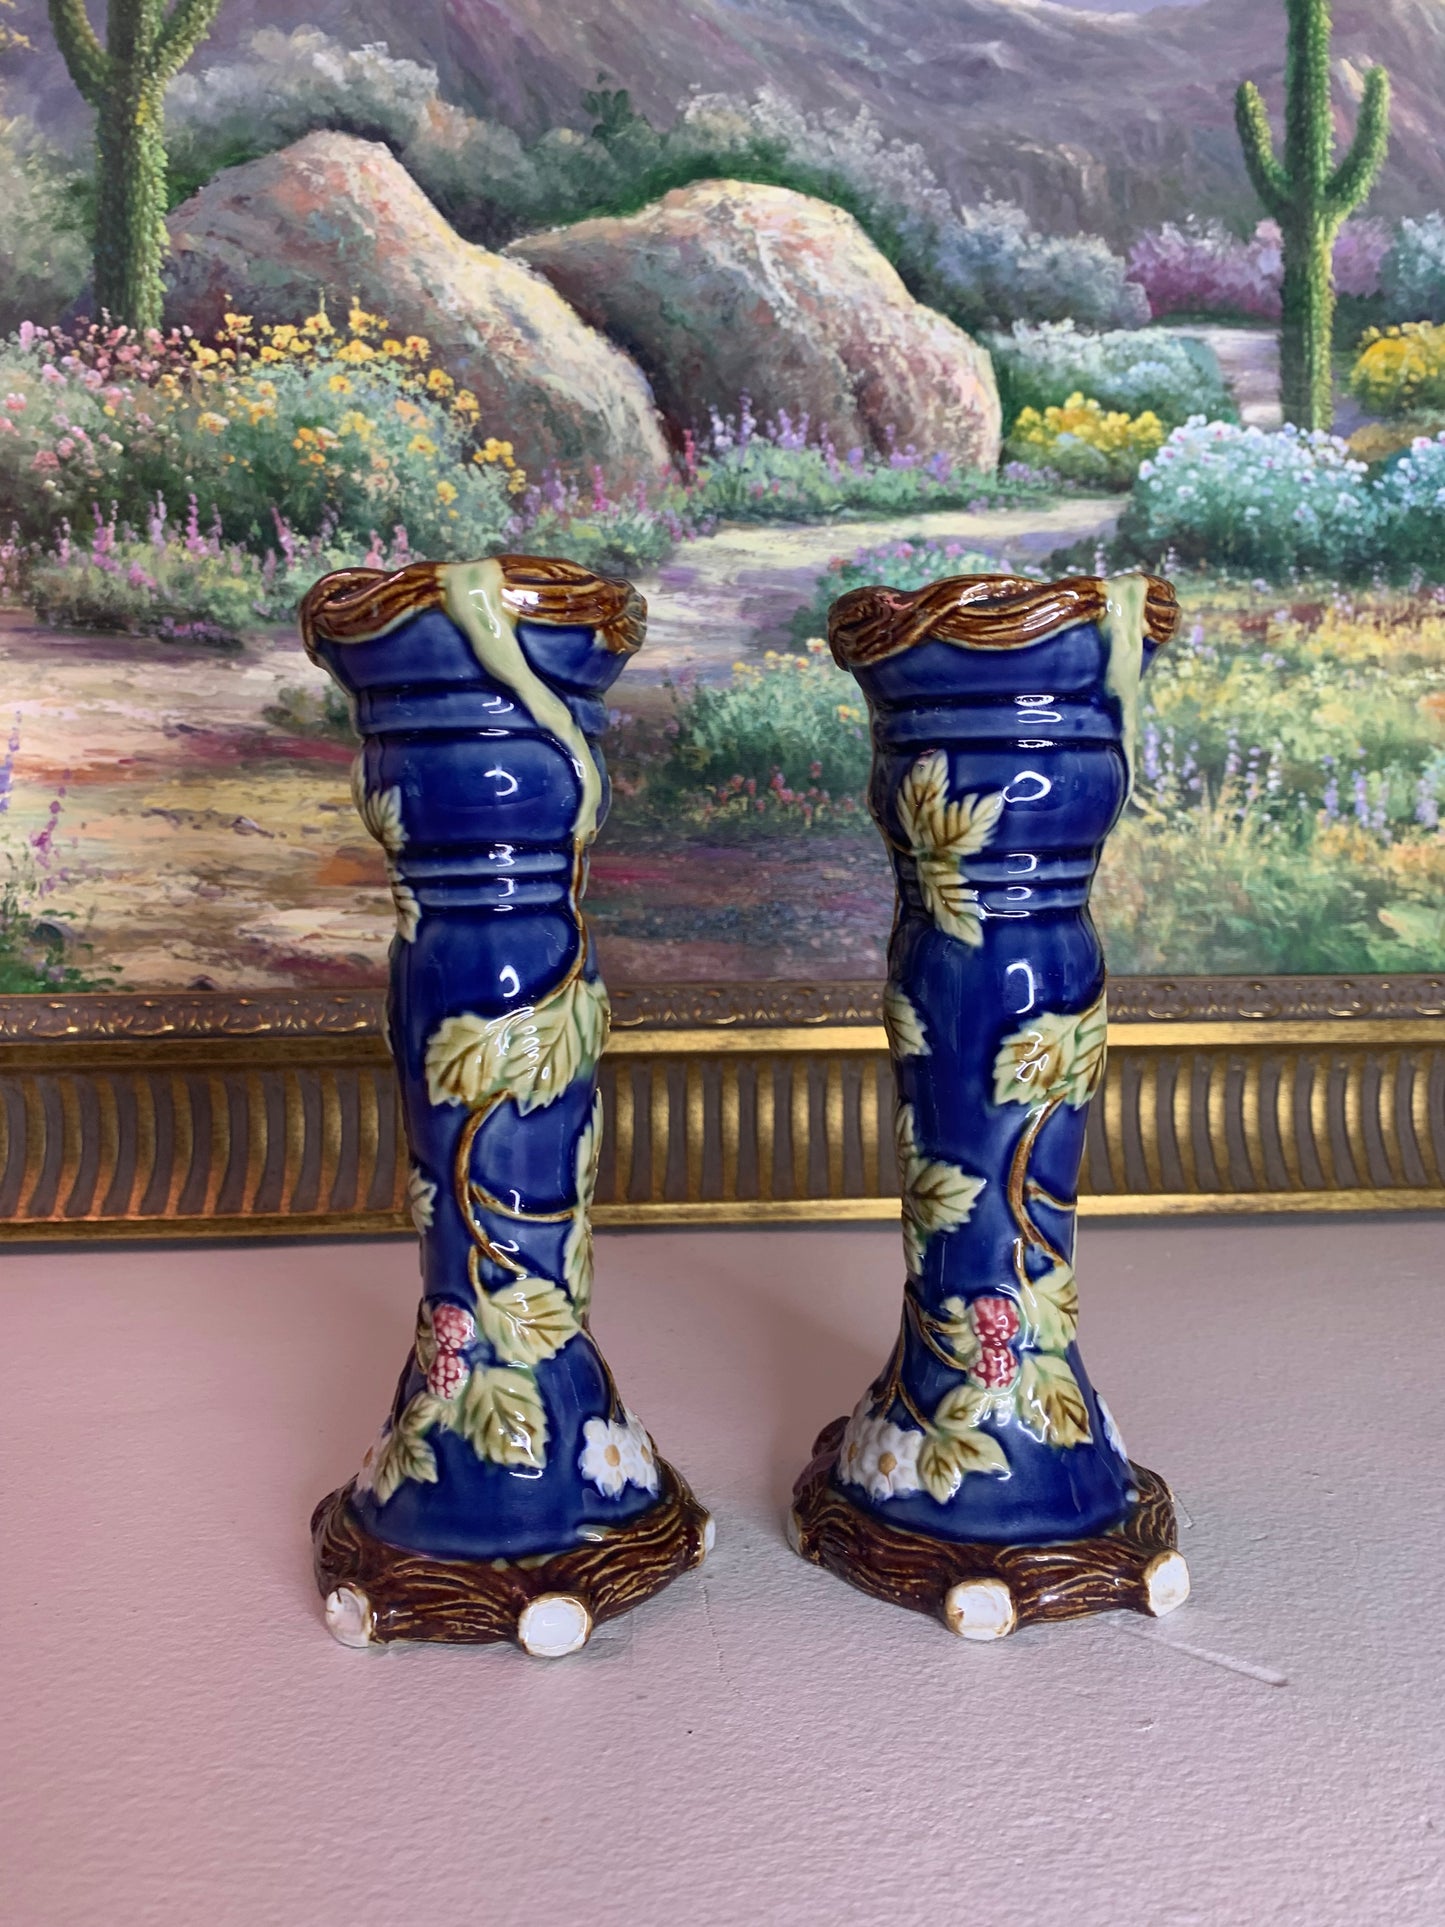 Gorgeous cobalt majolica candleholders with berry and floral details pair (2) - Excellent condition!